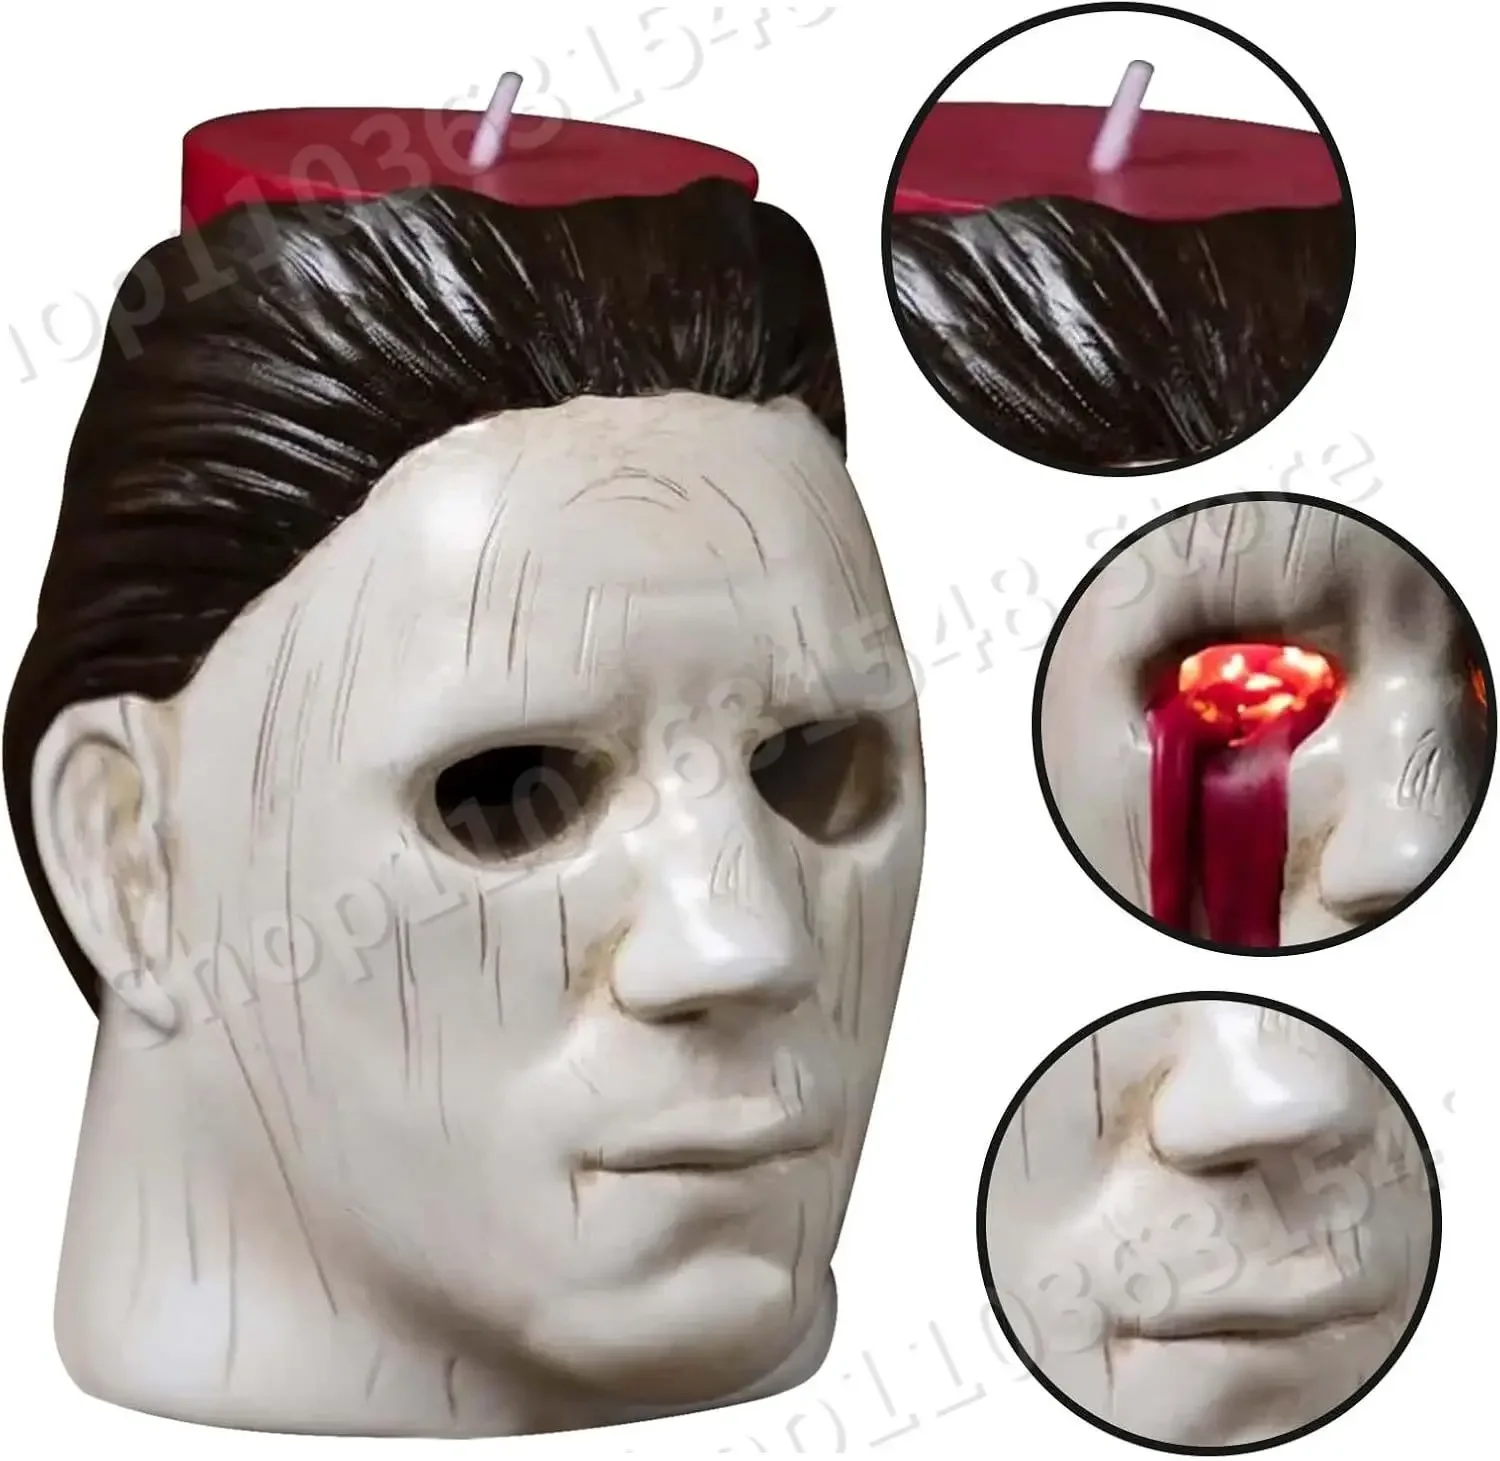 

New Michael Myers Candle Holder Statue with Bleeding Eyes Decor Halloween Candle Horror Holder Decorations Party Candlestick